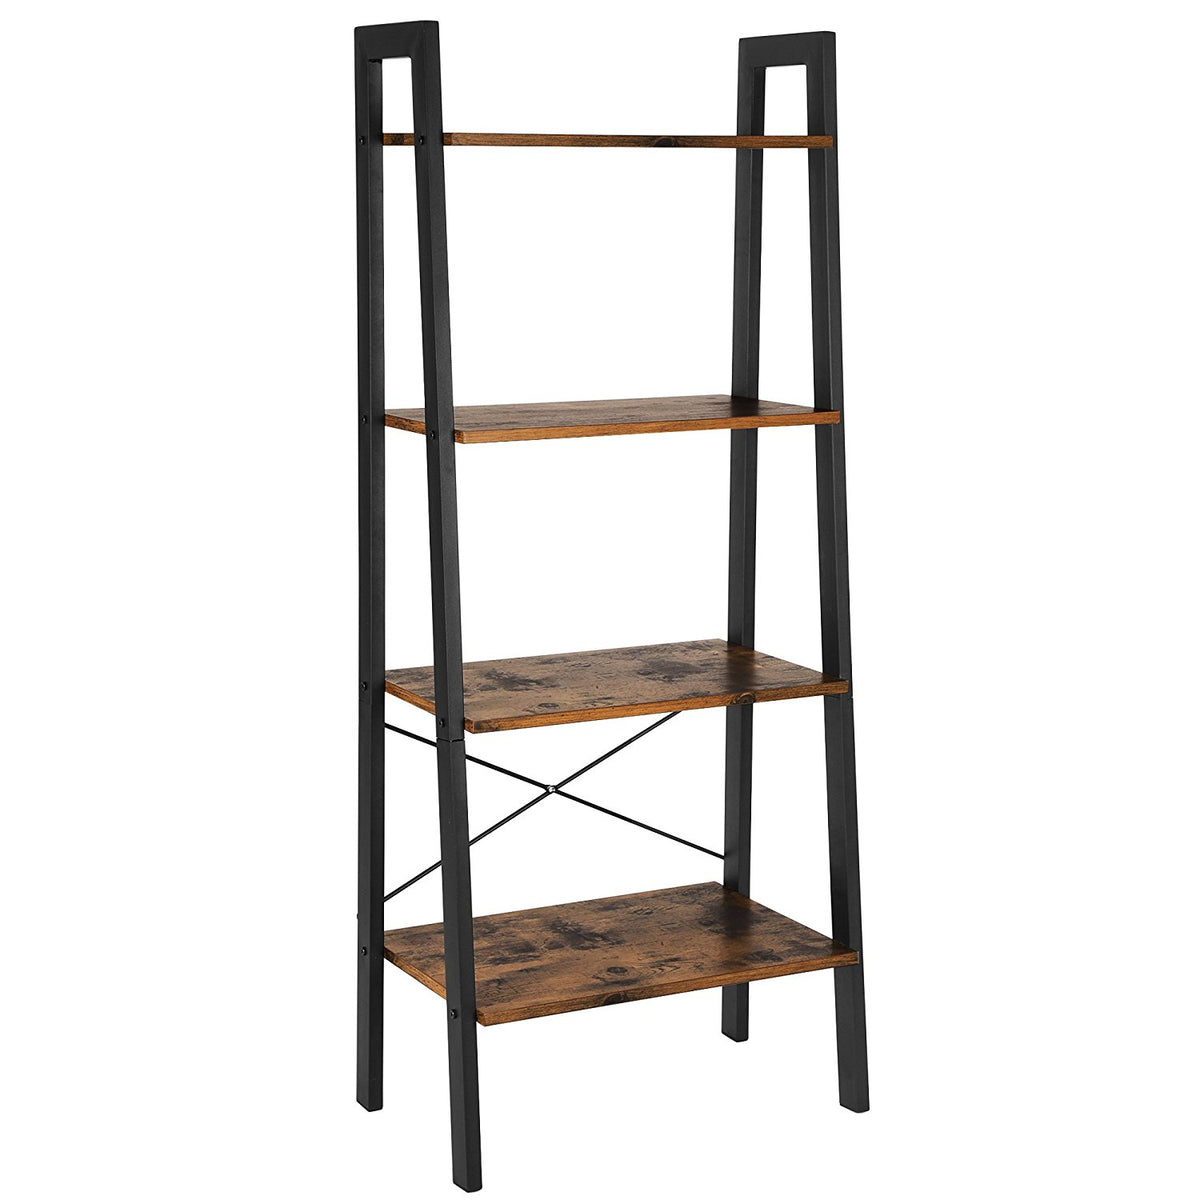 BM193923 - Four Tiered Rustic Wooden Ladder Shelf with Iron Framework, Brown and Black